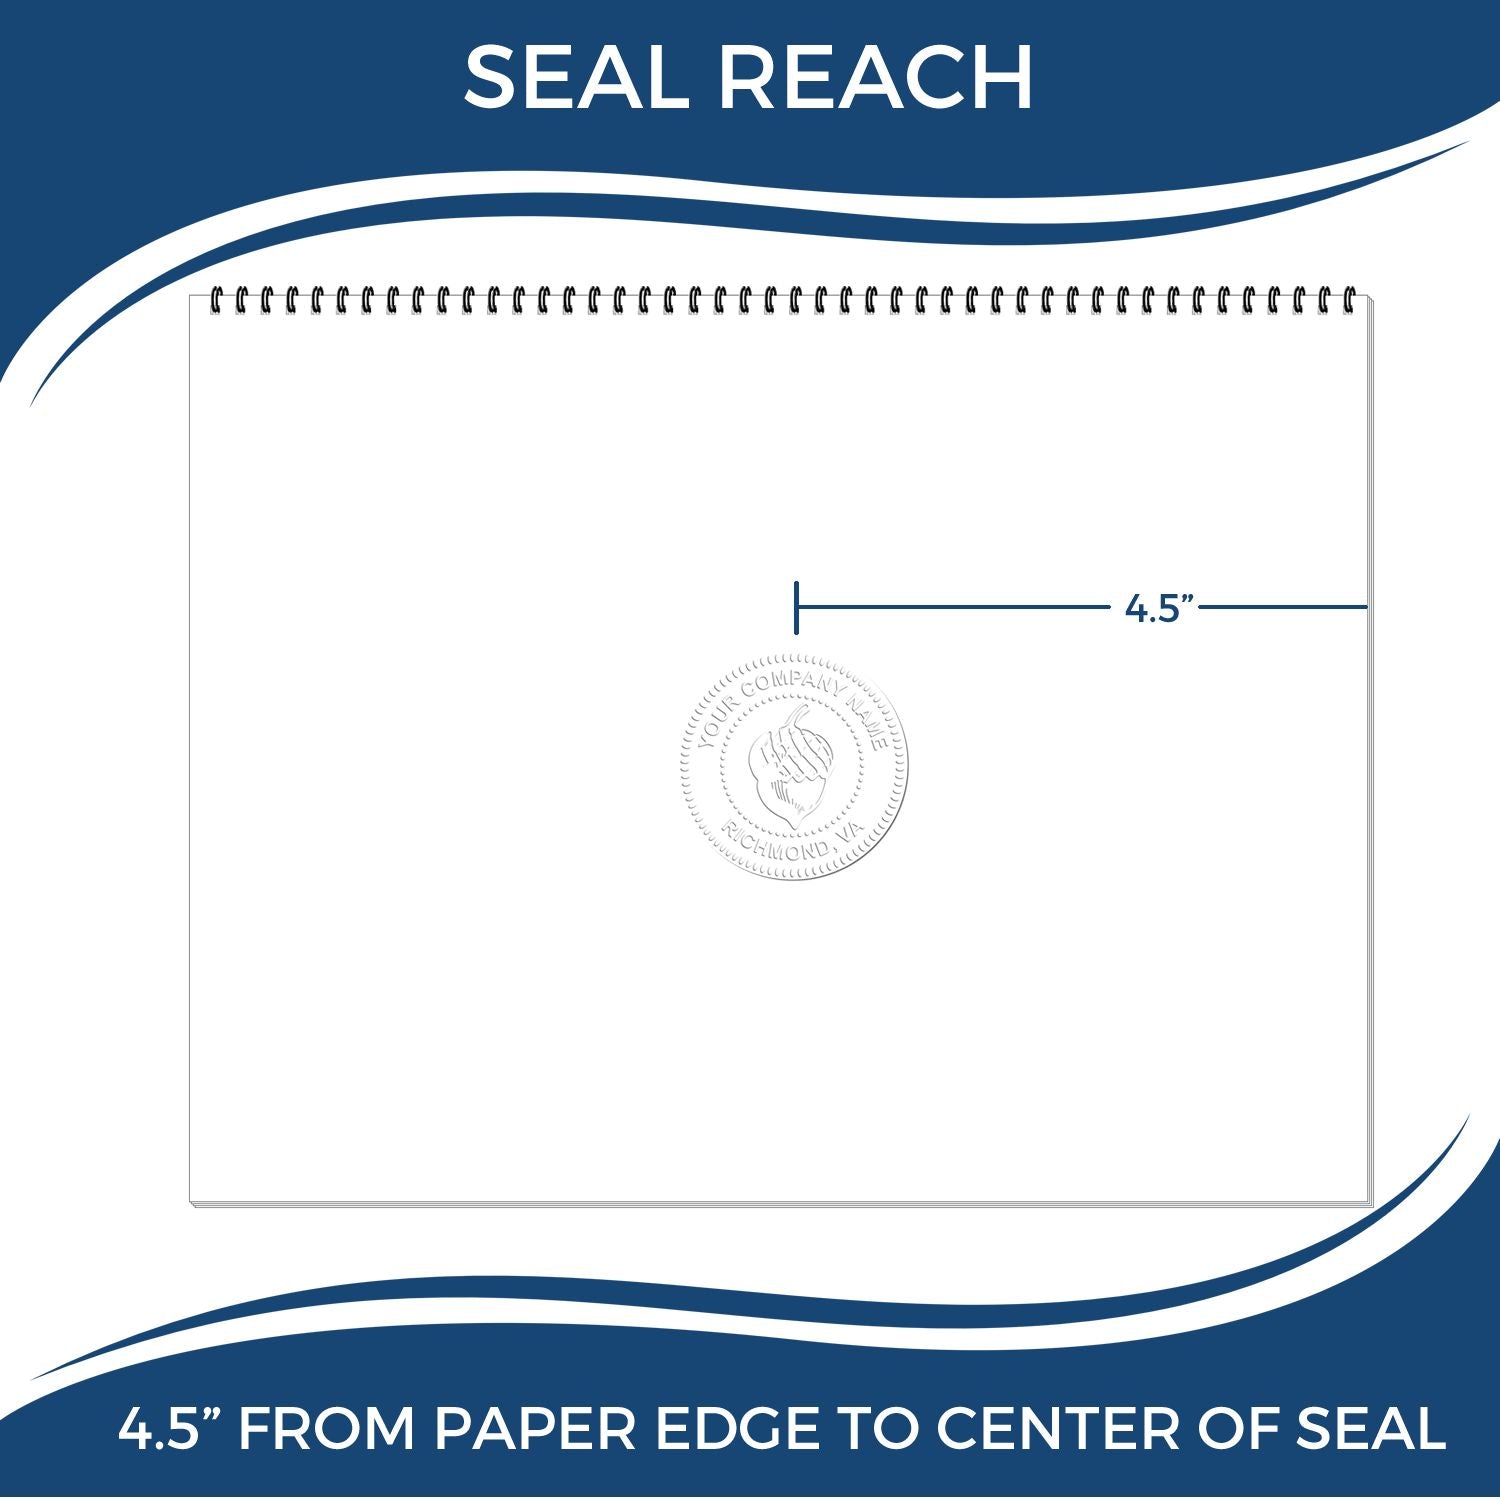 An infographic showing the seal reach which is represented by a ruler and a miniature seal image of the State of Massachusetts Extended Long Reach Engineer Seal